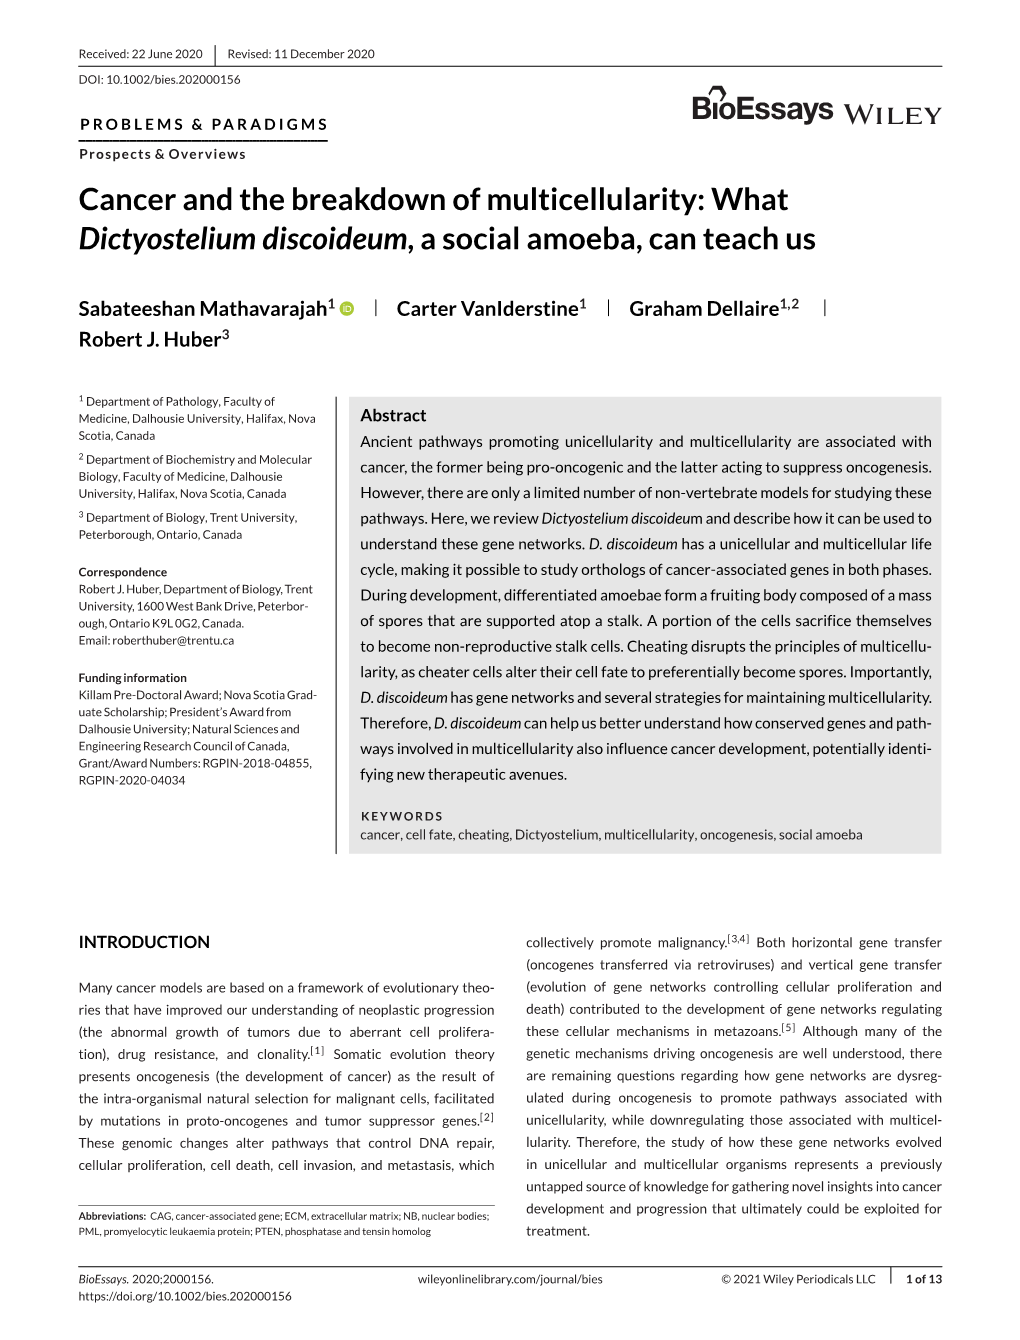 Cancer and the Breakdown of Multicellularity: What Dictyostelium Discoideum, a Social Amoeba, Can Teach Us